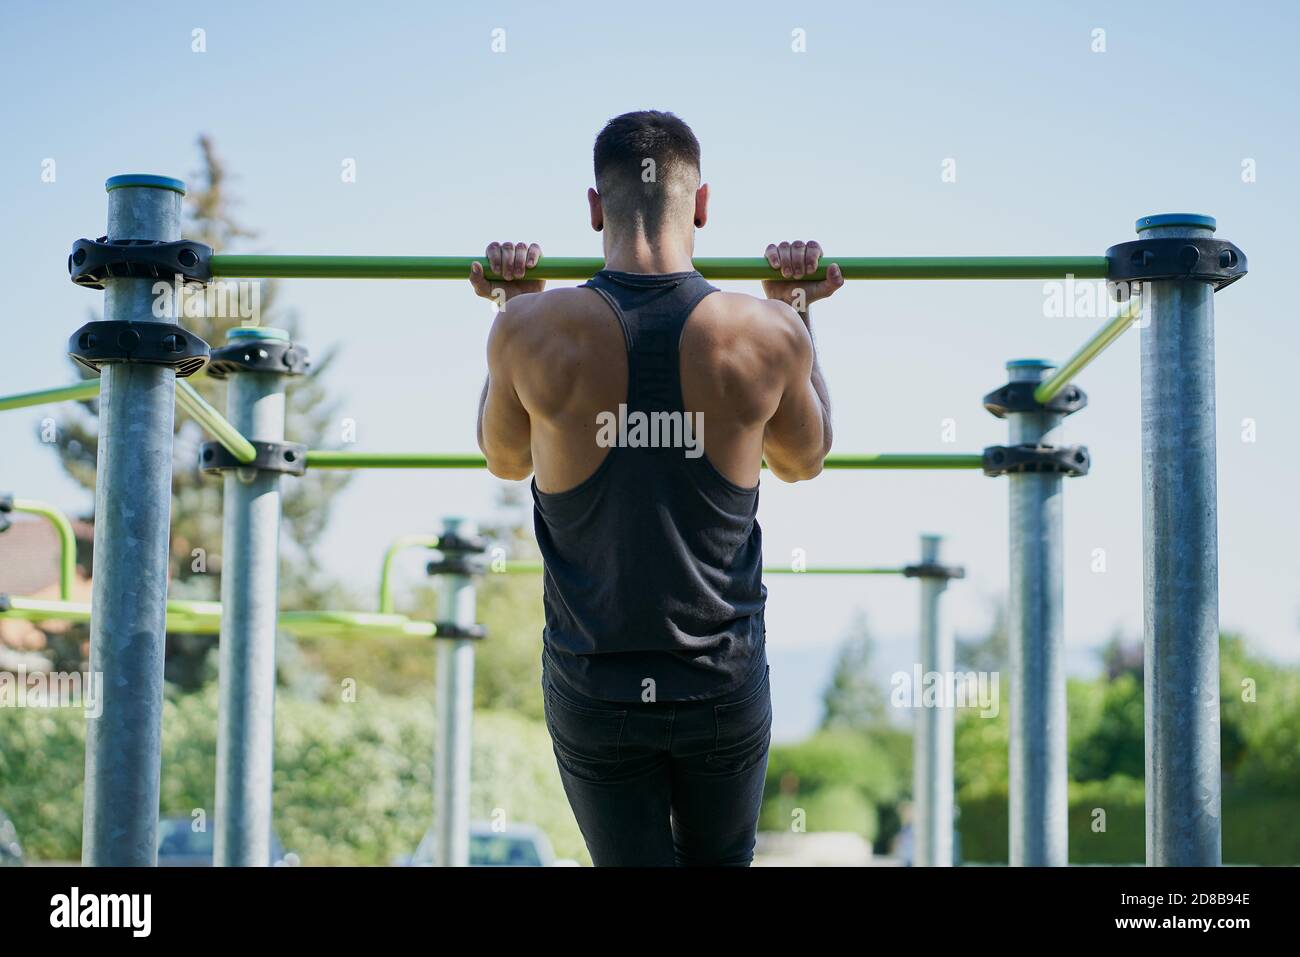 Back view of a man practicing calisthenics in a park on sunny day Stock Photo